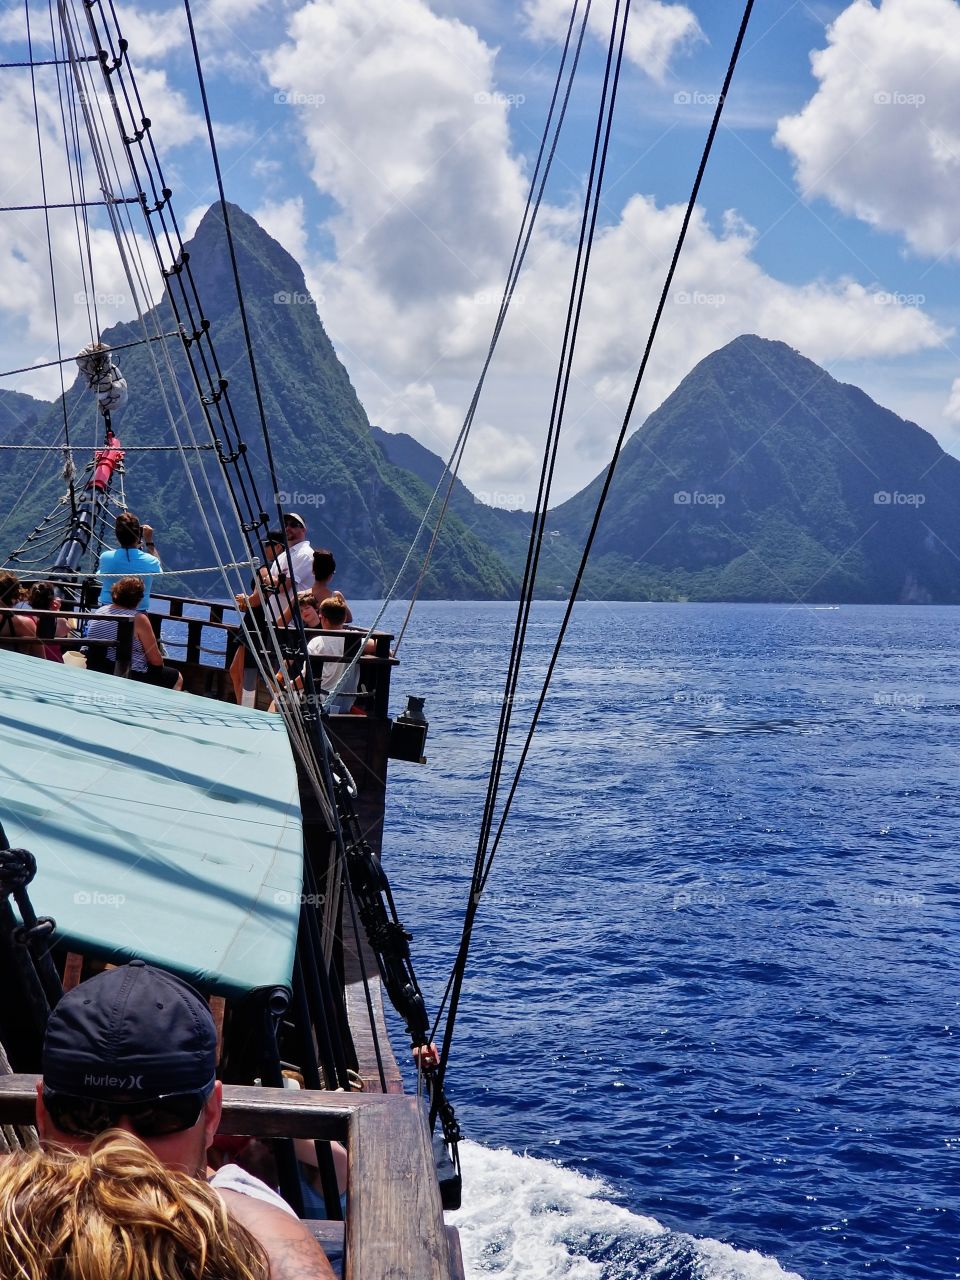 This is a dream come true..Seeing the pitons up close..Last time I was on a speed boat and I couldn't get photos😏.So this time I choose a slow boat..a pirate ship🤗